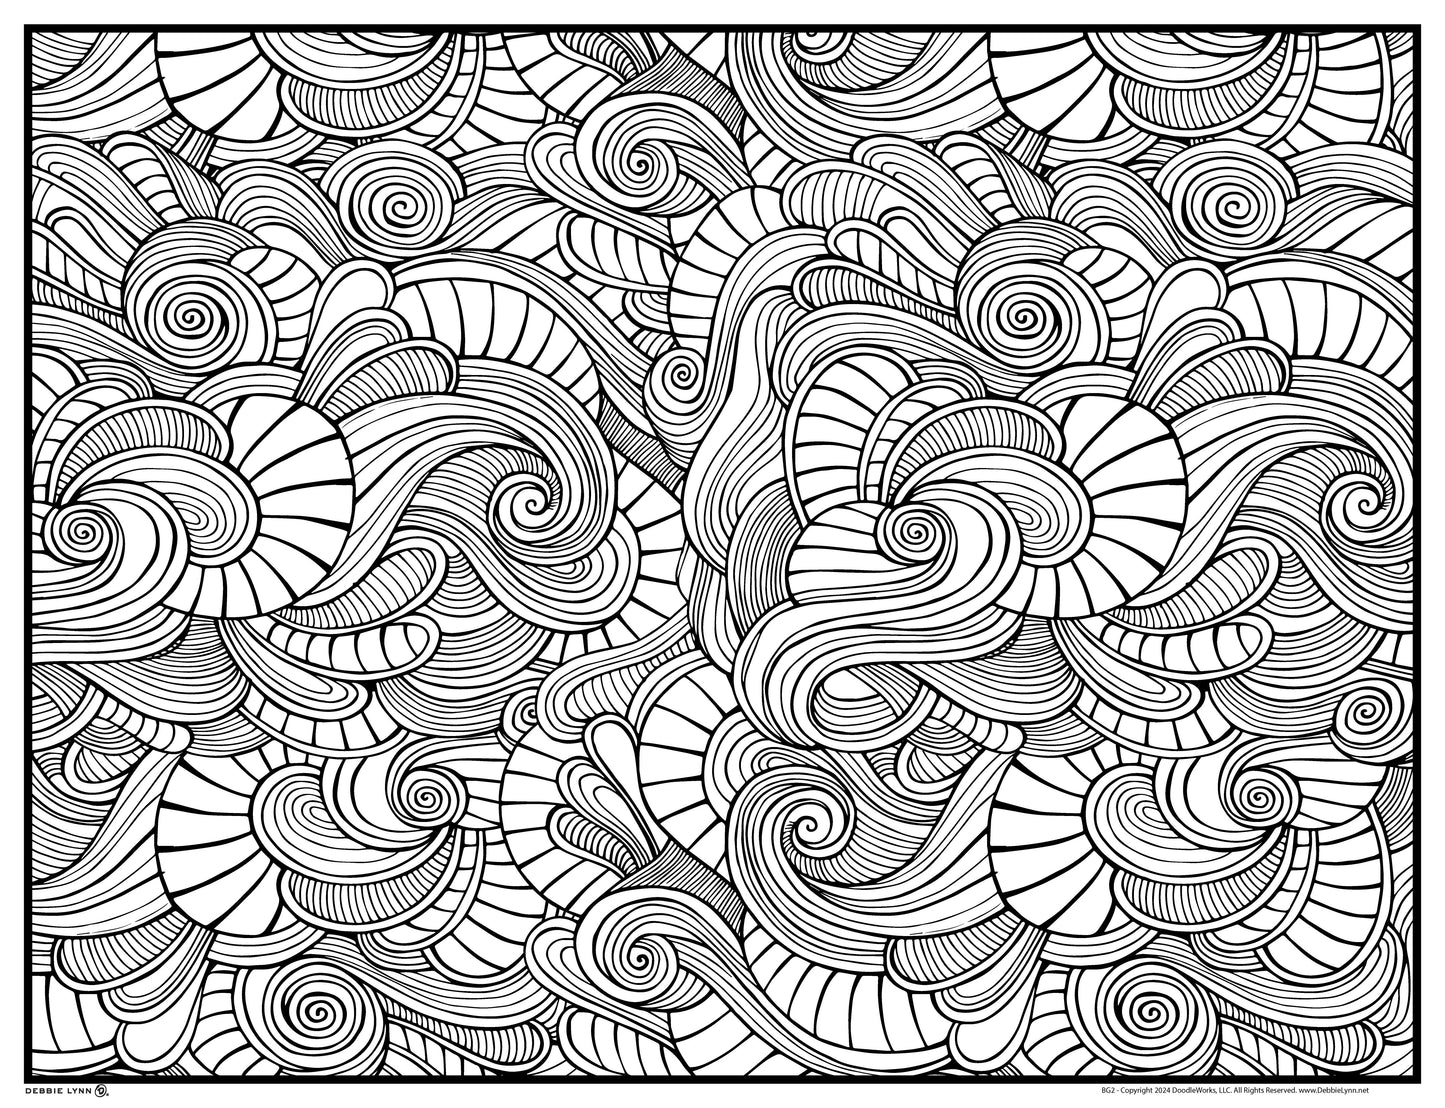 Background 2 Custom Personalized Giant Coloring Poster 46"x60"